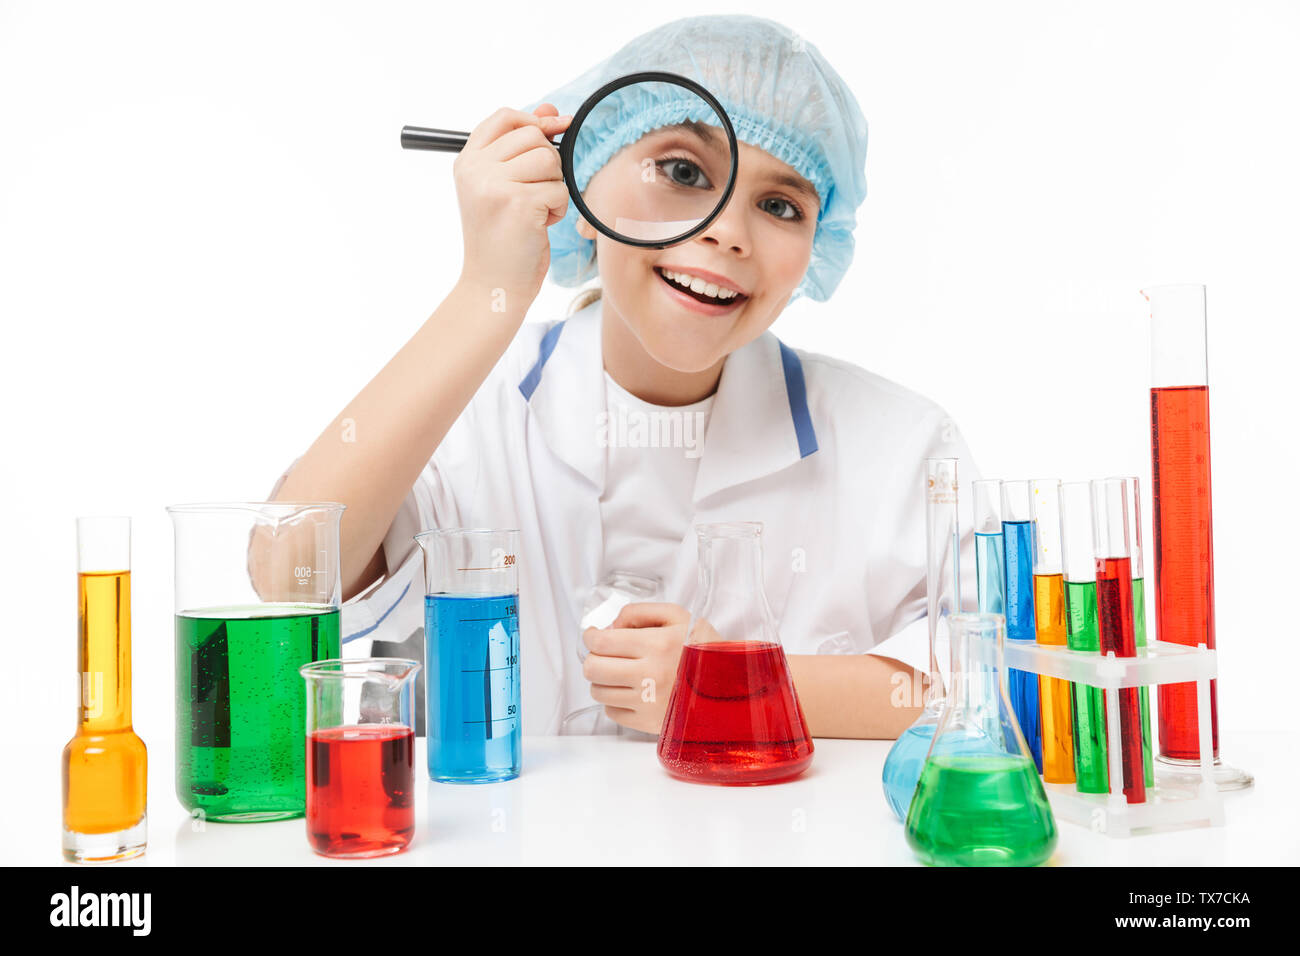 Portrait of microbiologist little girl in white laboratory coat holding magnifying glass during chemical experiments isolated over white background Stock Photo